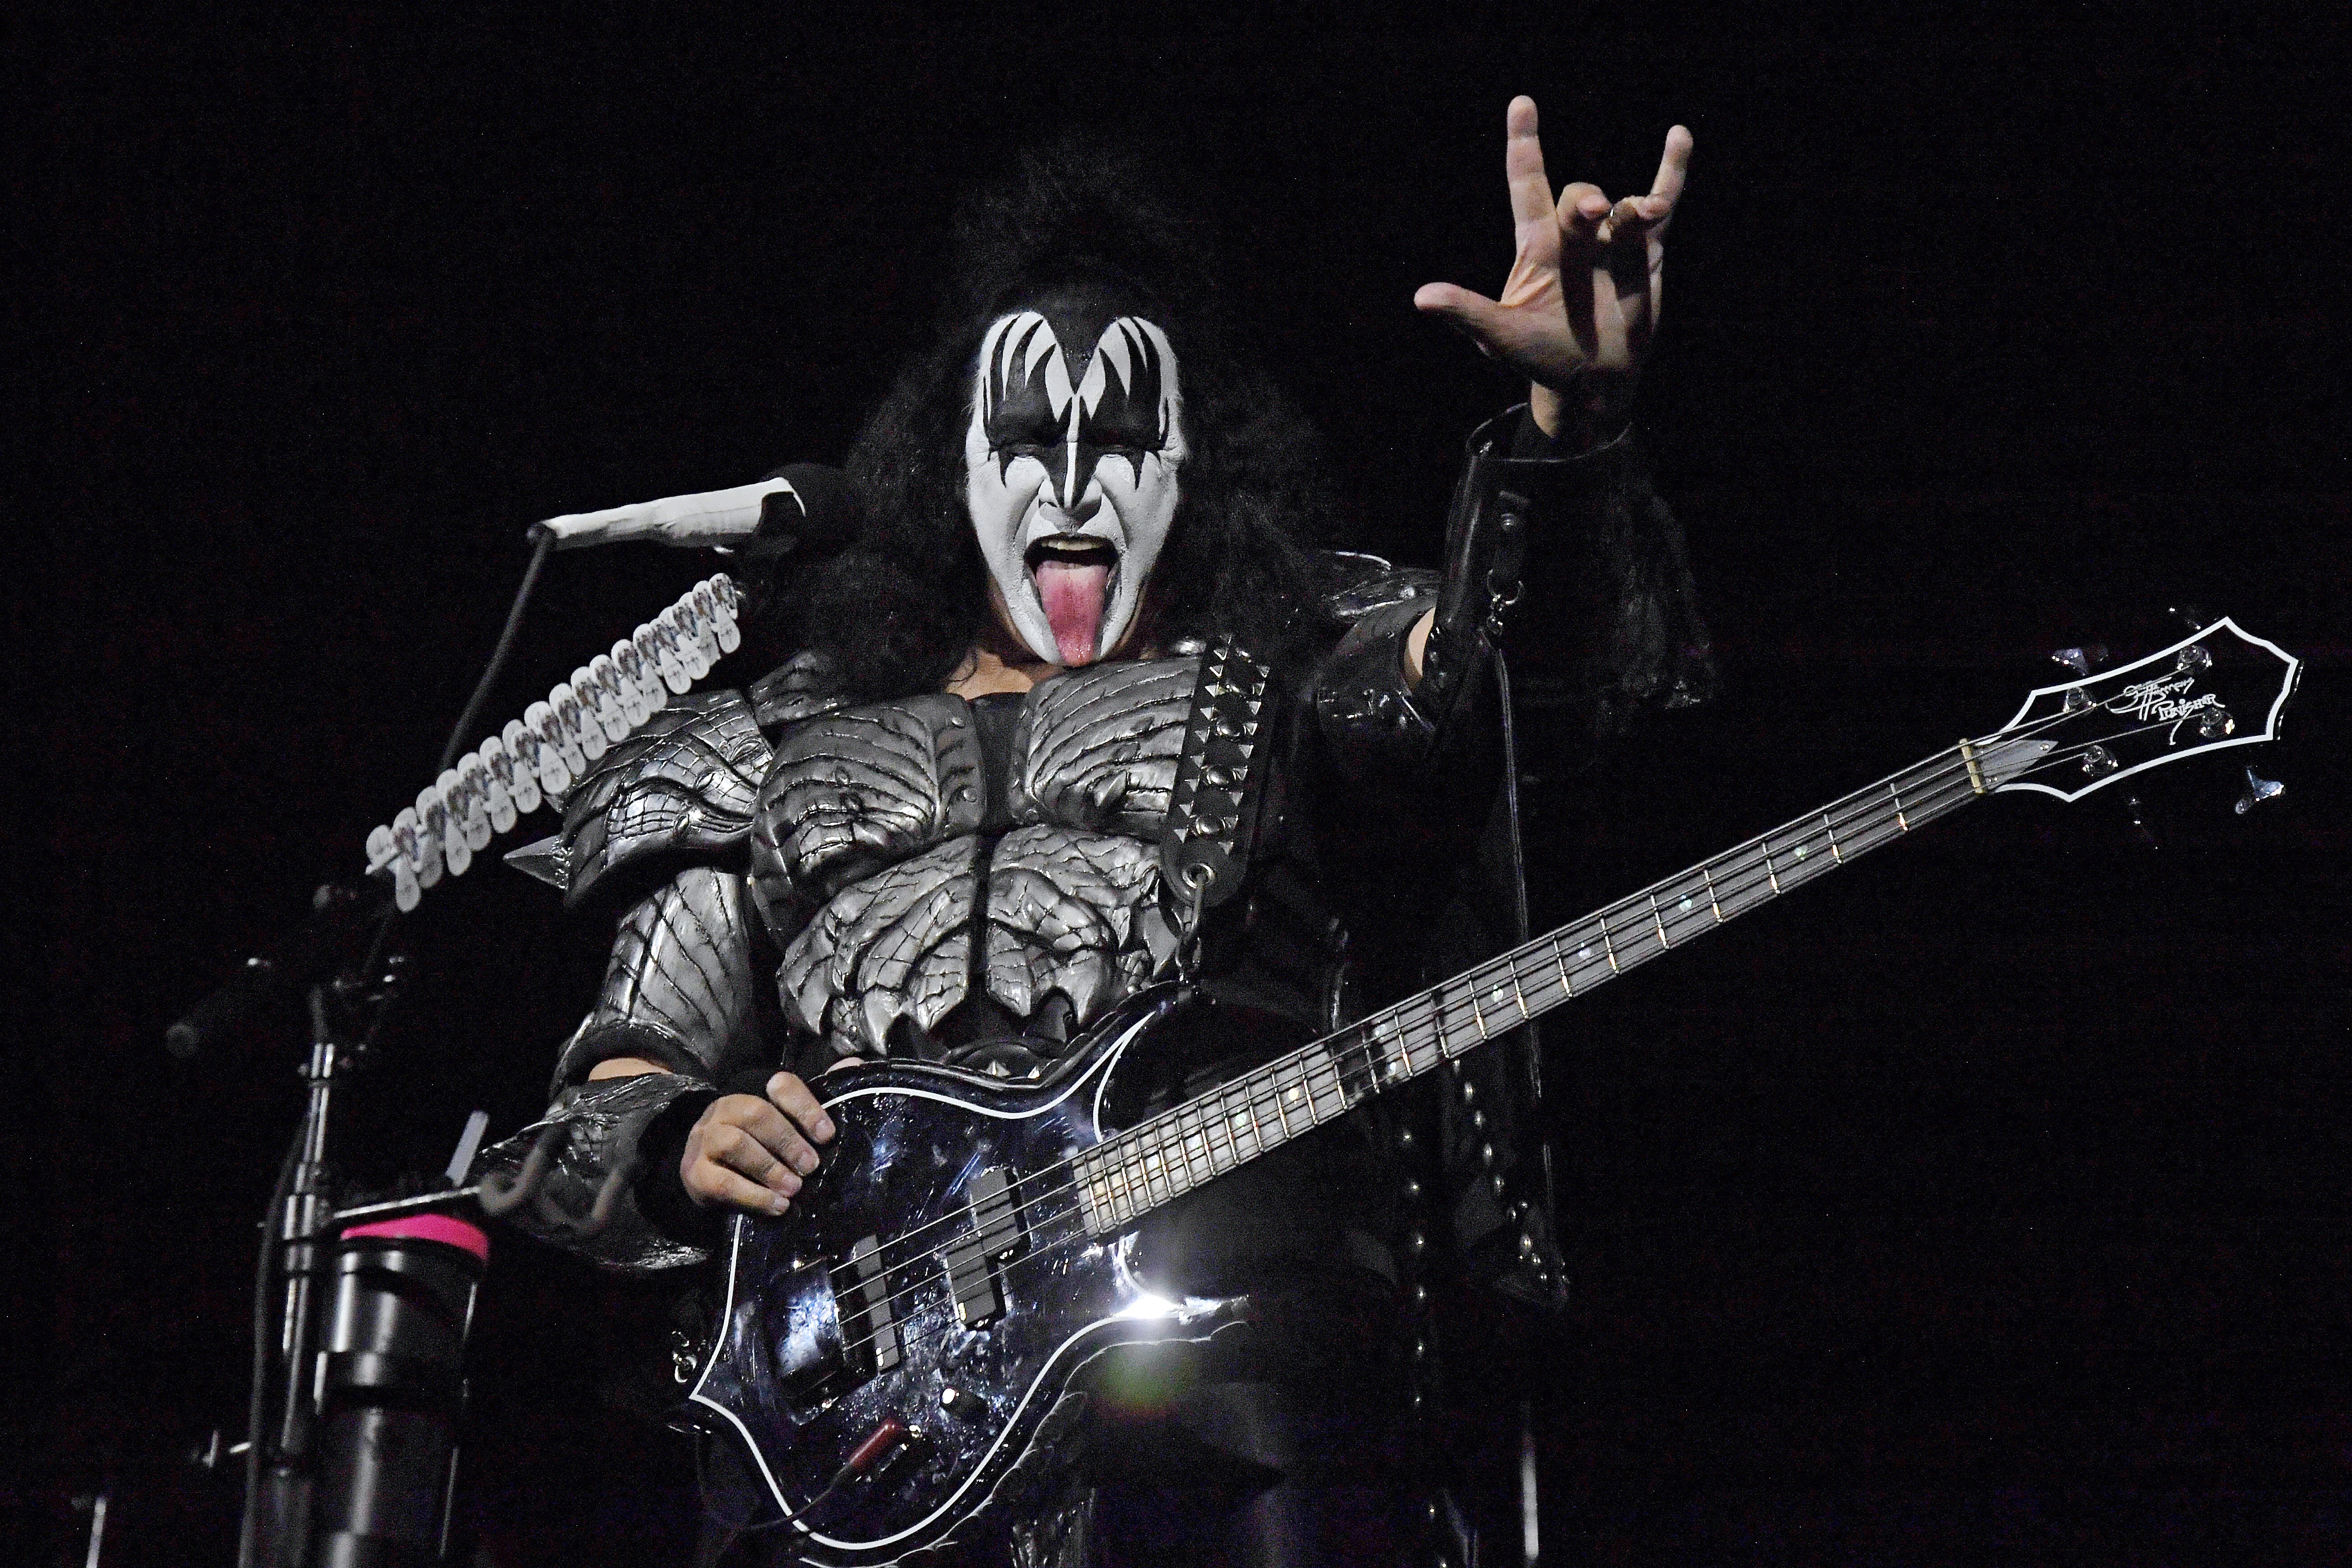 NEW YORK, NEW YORK - JUNE 11: Gene Simmons of KISS performs onstage during the Tribeca Festival screening of "Biography: KISStory" at Battery Park on June 11, 2021 in New York City. (Photo by Kevin Mazur/Getty Images for A&E) (Foto: Getty Images for A&E)